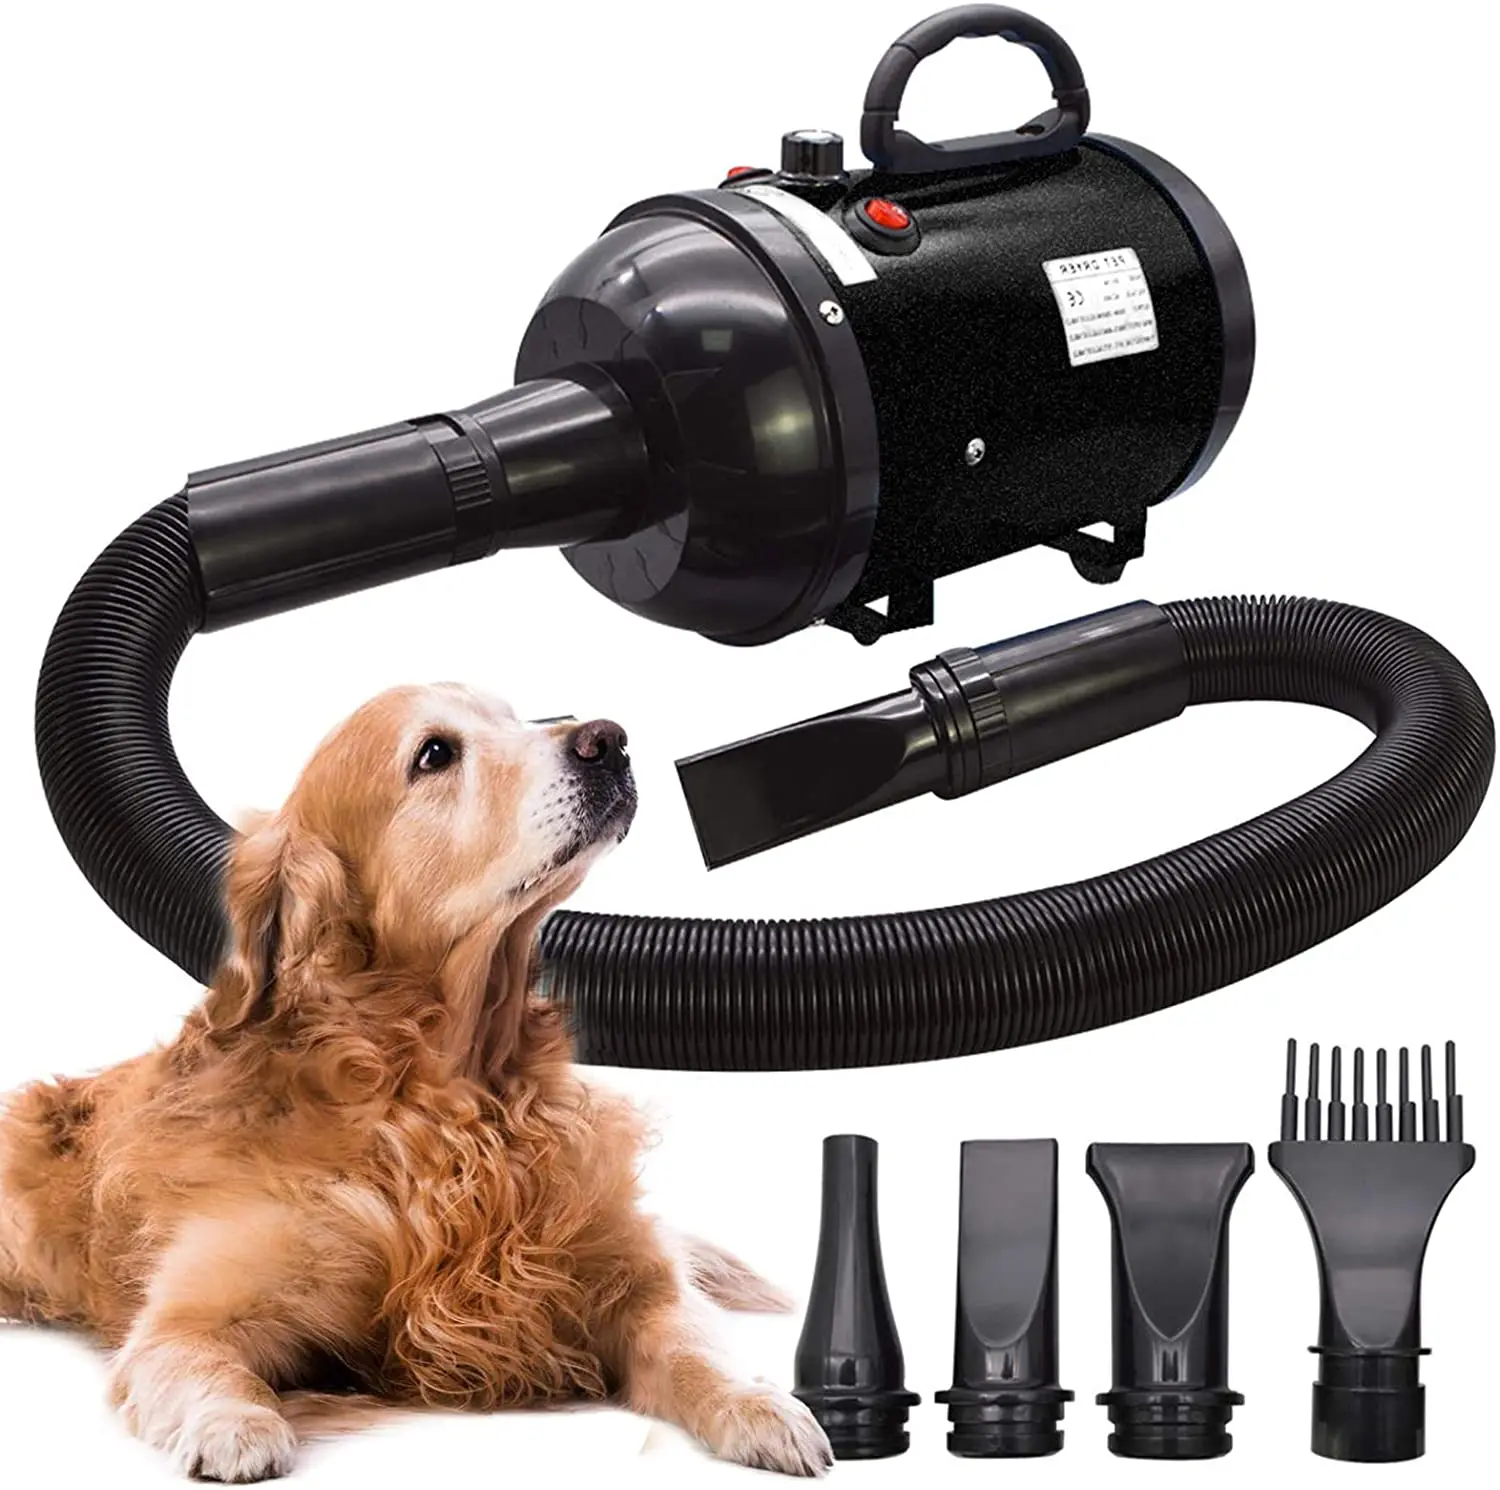 

Stepless Adjustable Speed Temperature Pet Hair Dryers for Dog Grooming with 4 Different Nozzles